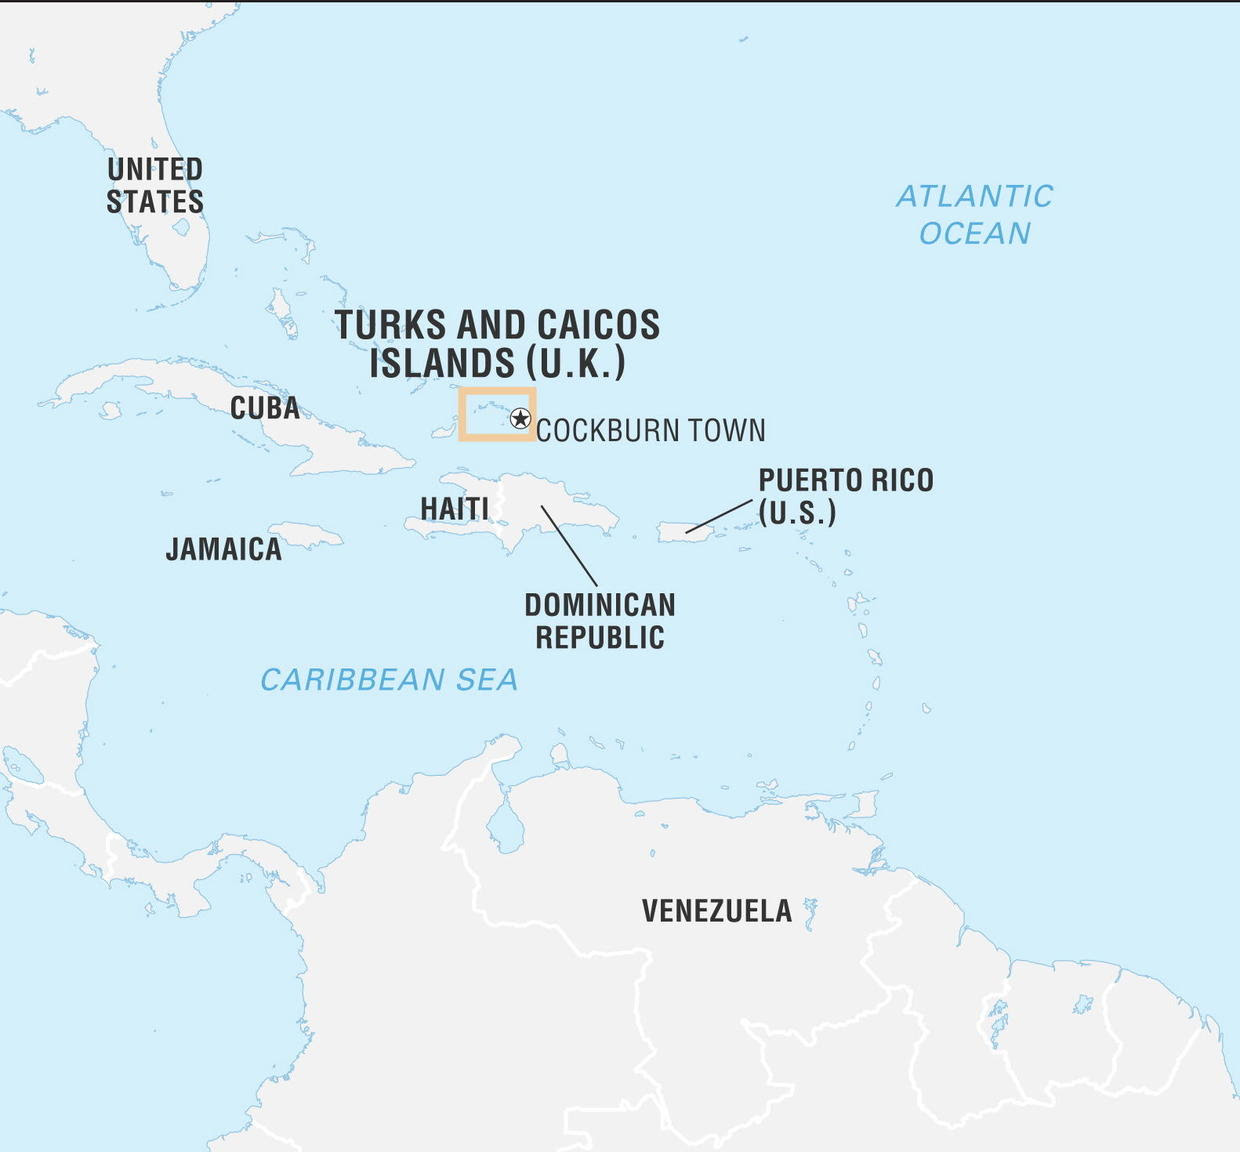 A map of the Turks and Caicos region